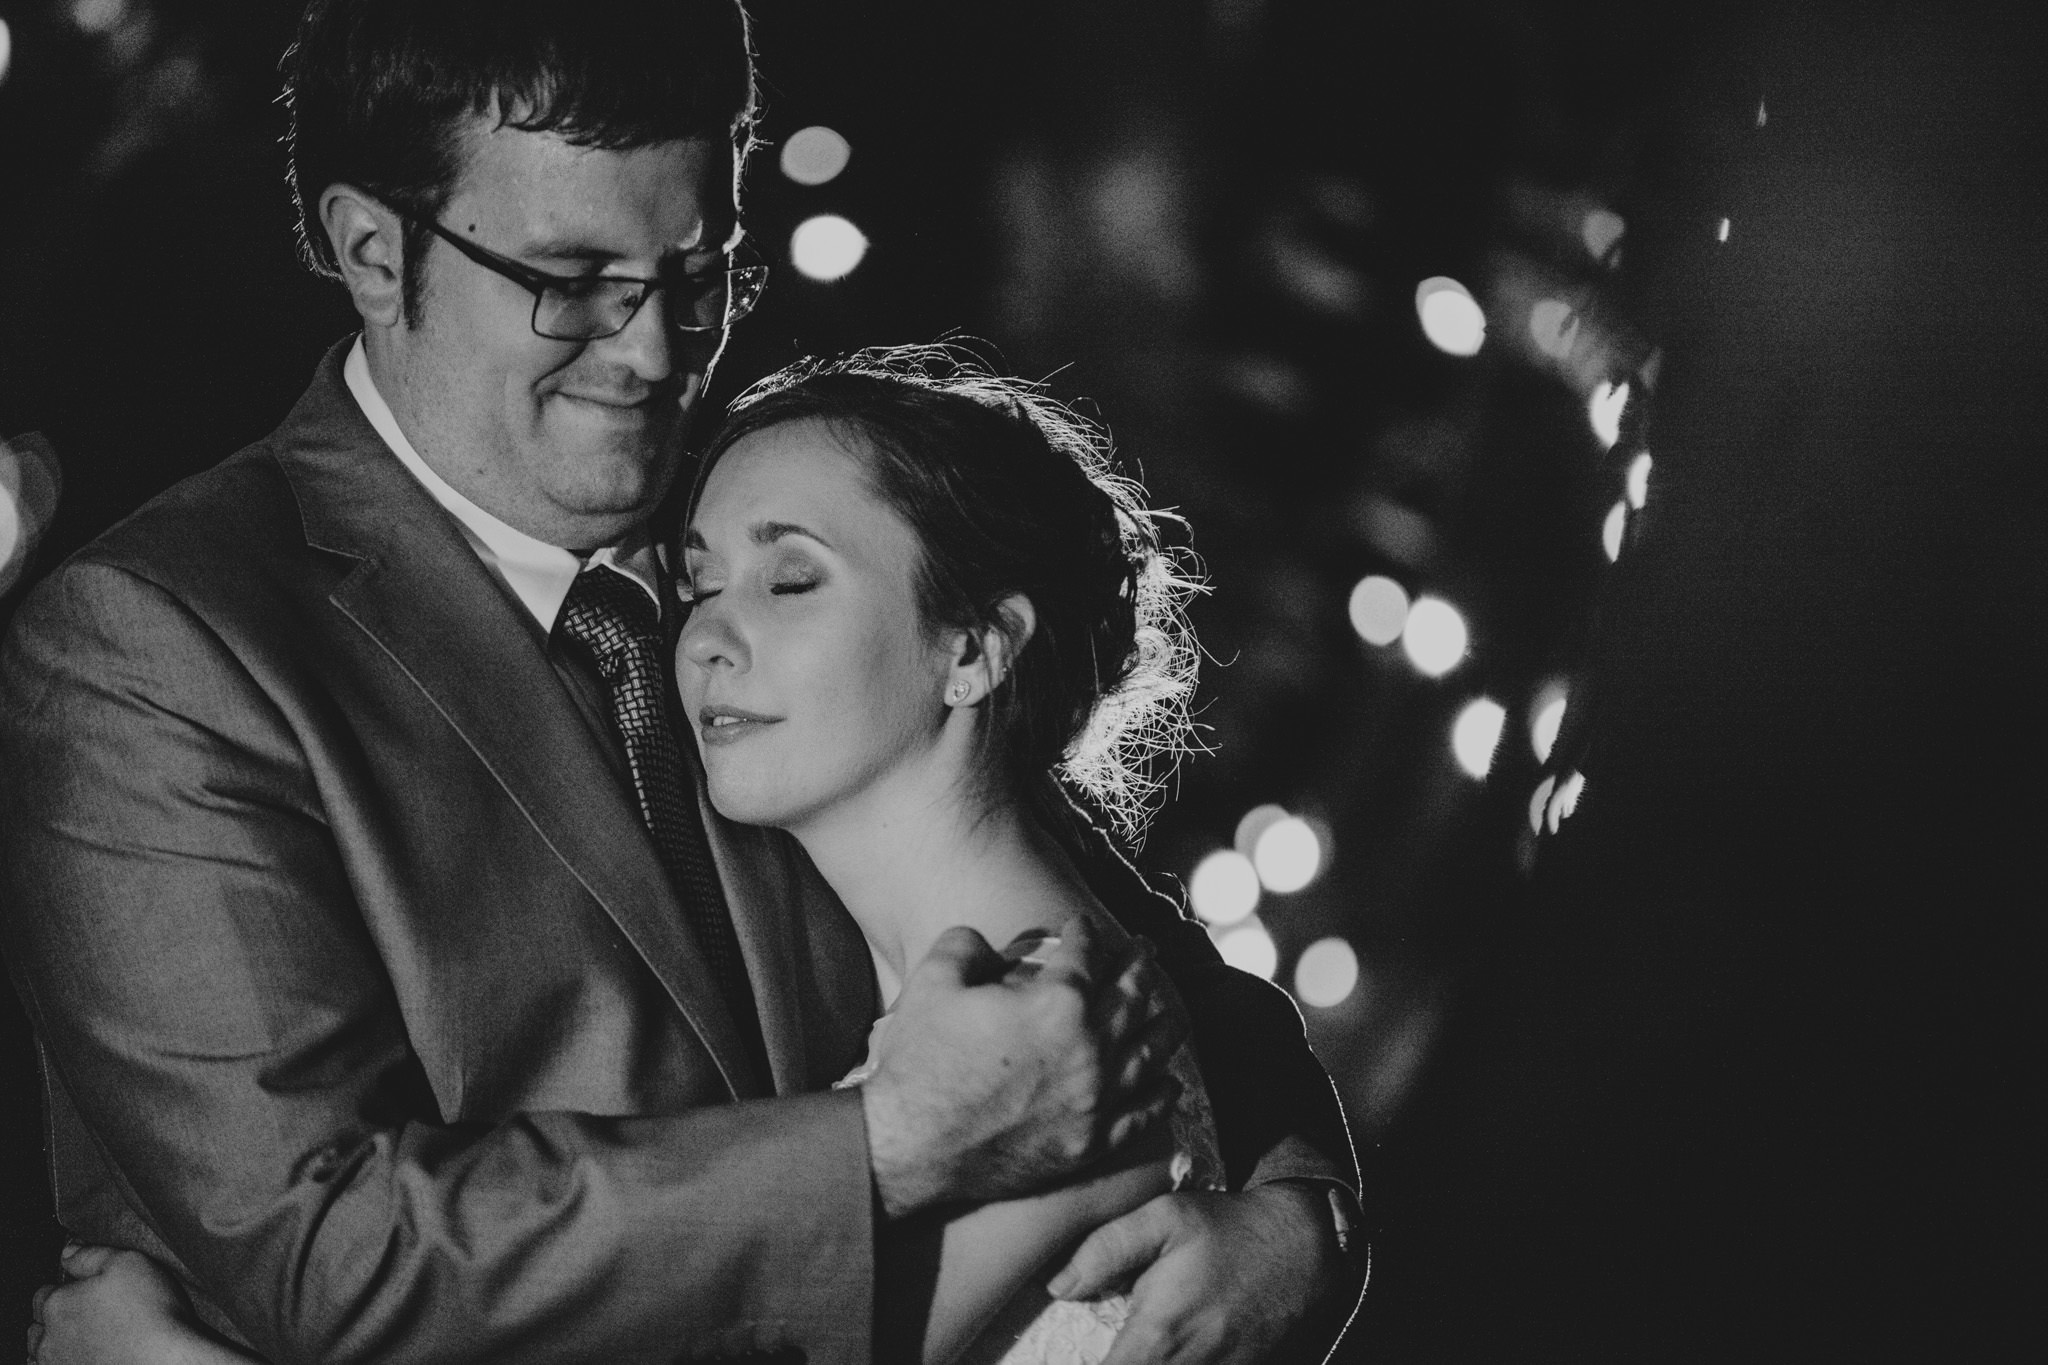 Nightime wedding portrait of the bride and groom at the Shuford House in Hickory